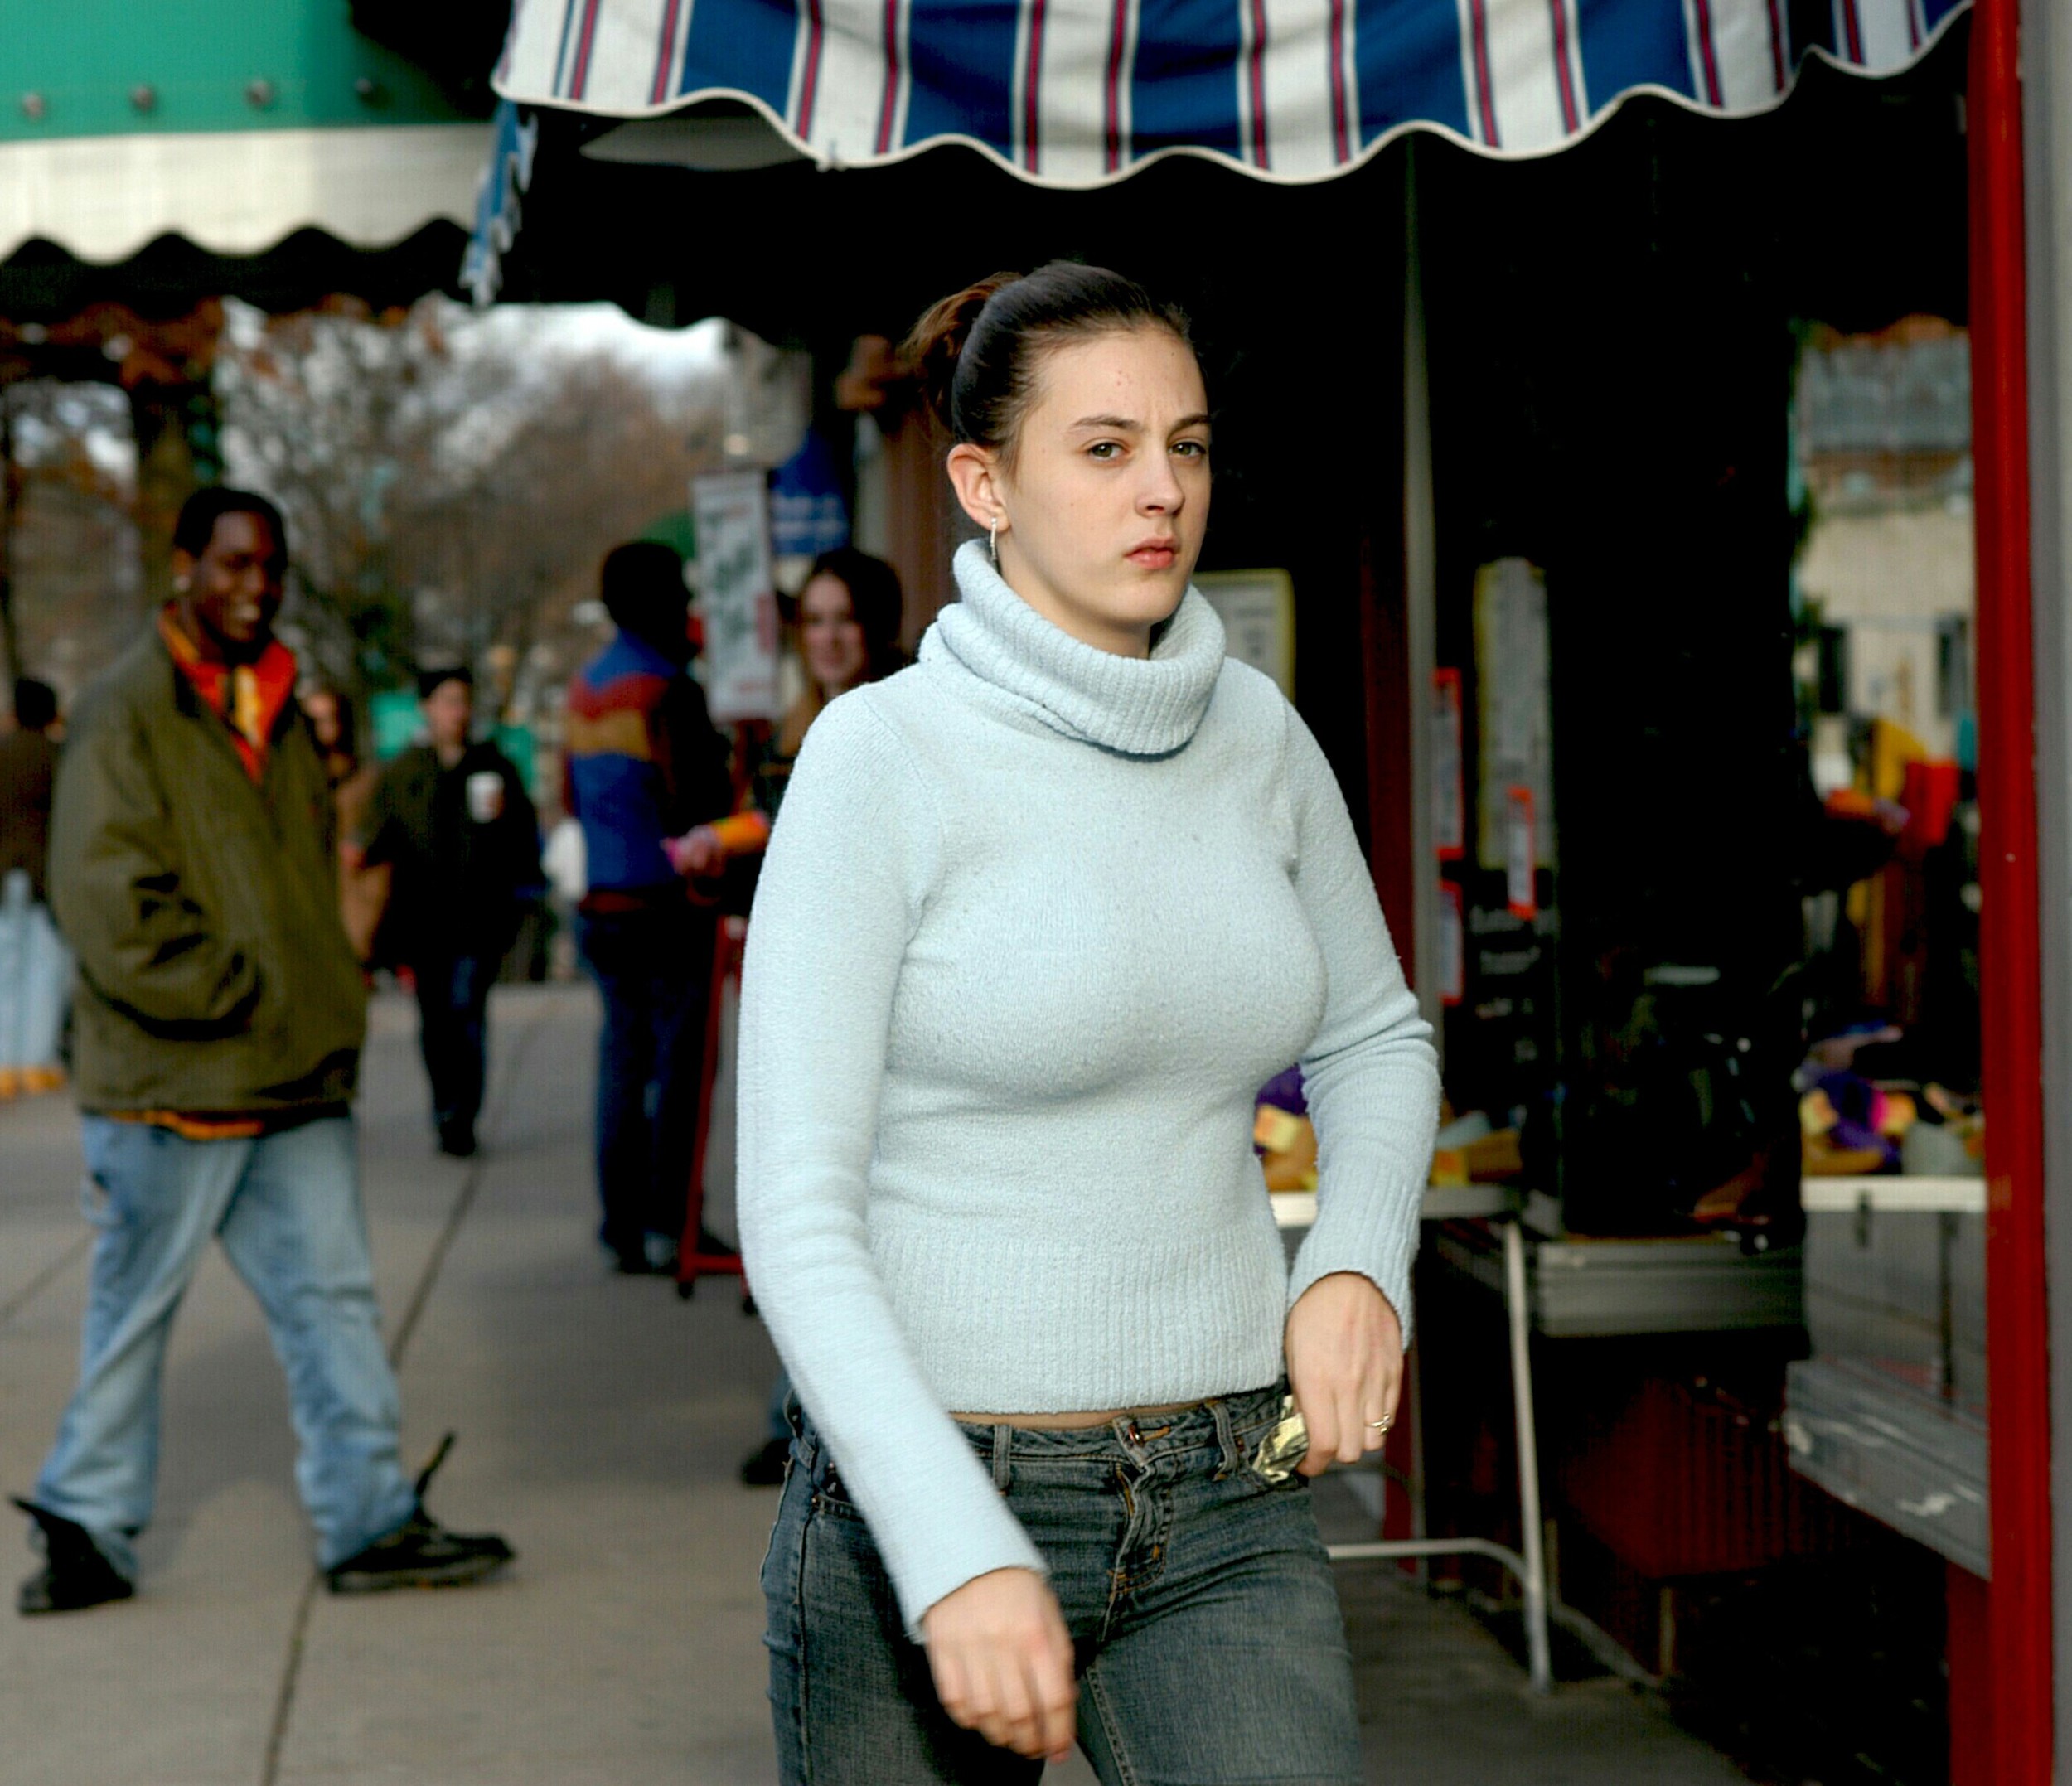 Girl in a blue sweater and watcher.jpg